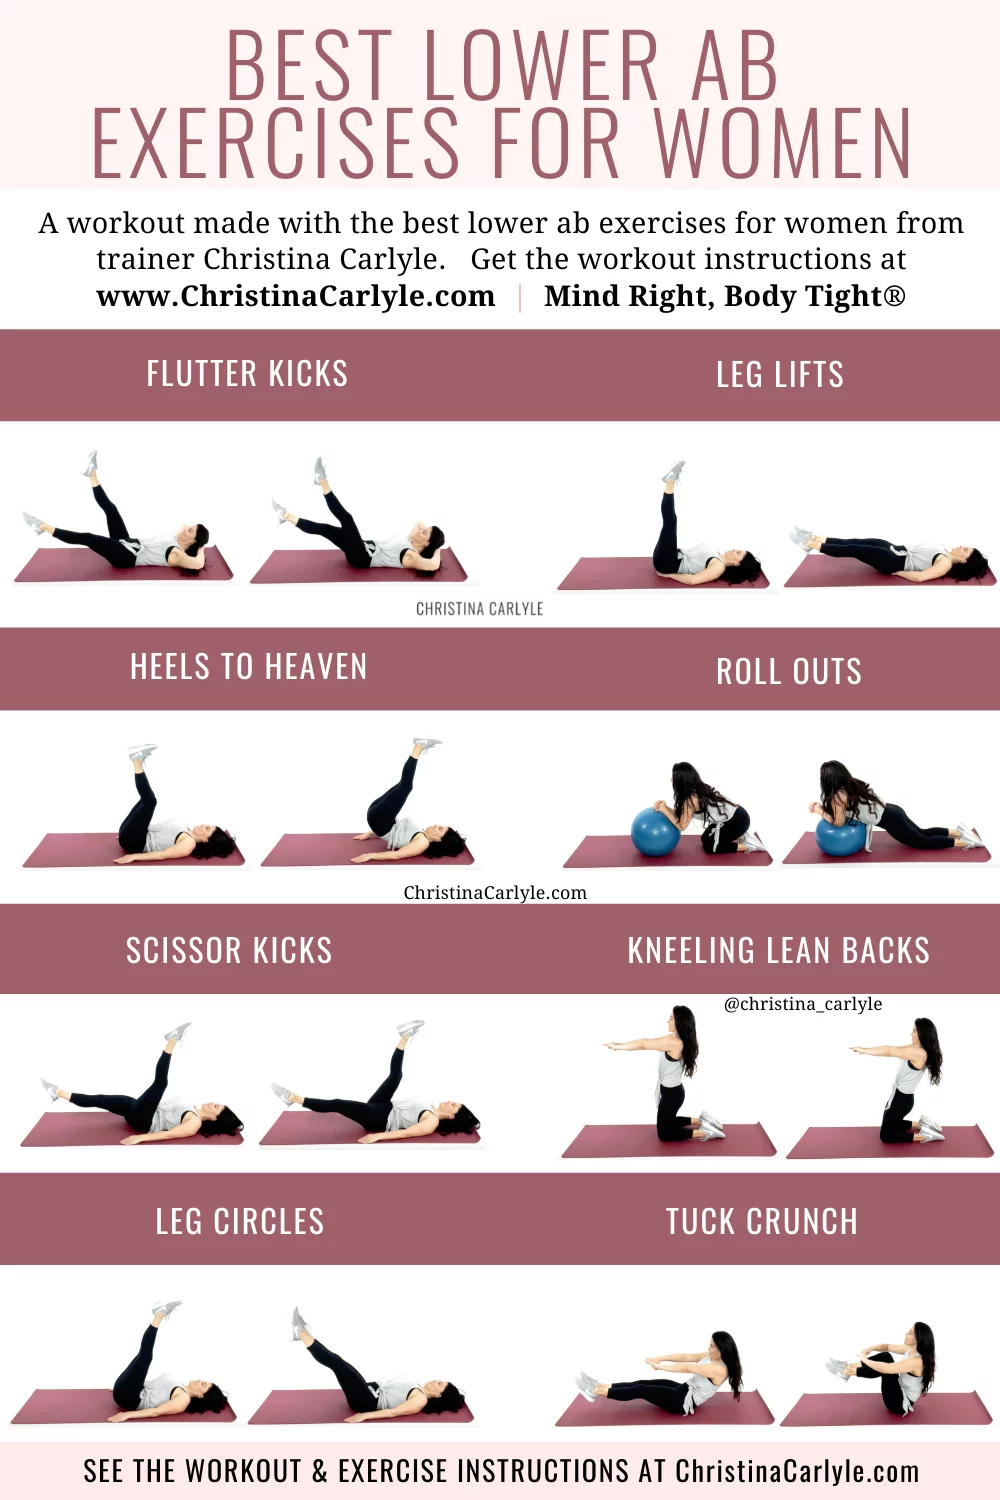 The Best Lower Ab Exercises for Women - Christina Carlyle